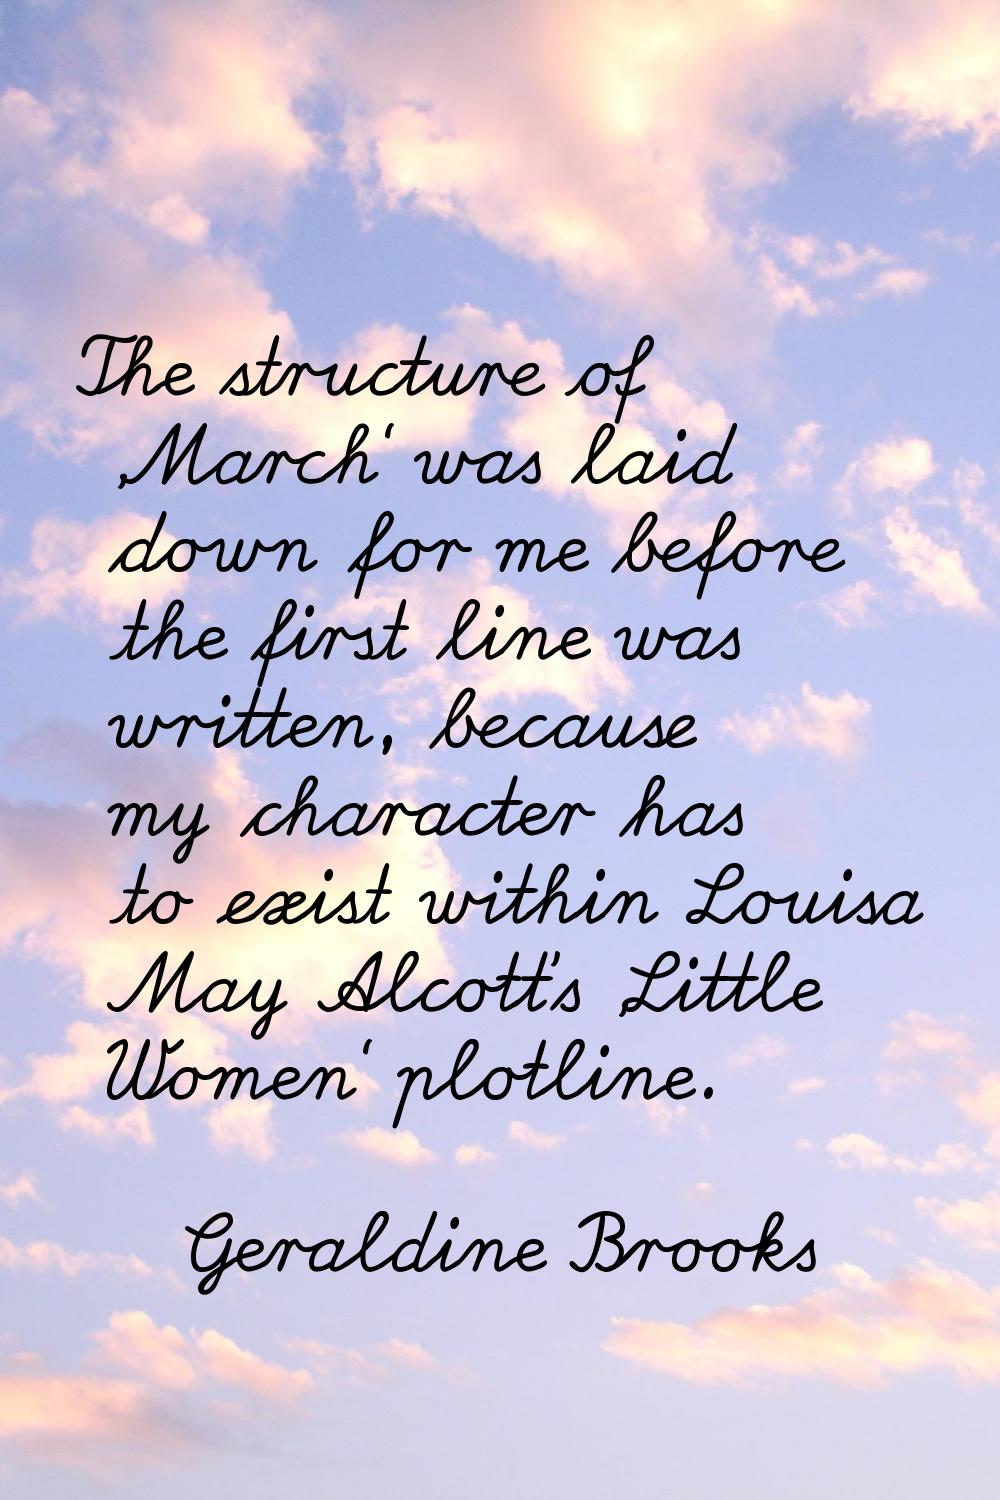 The structure of 'March' was laid down for me before the first line was written, because my charact